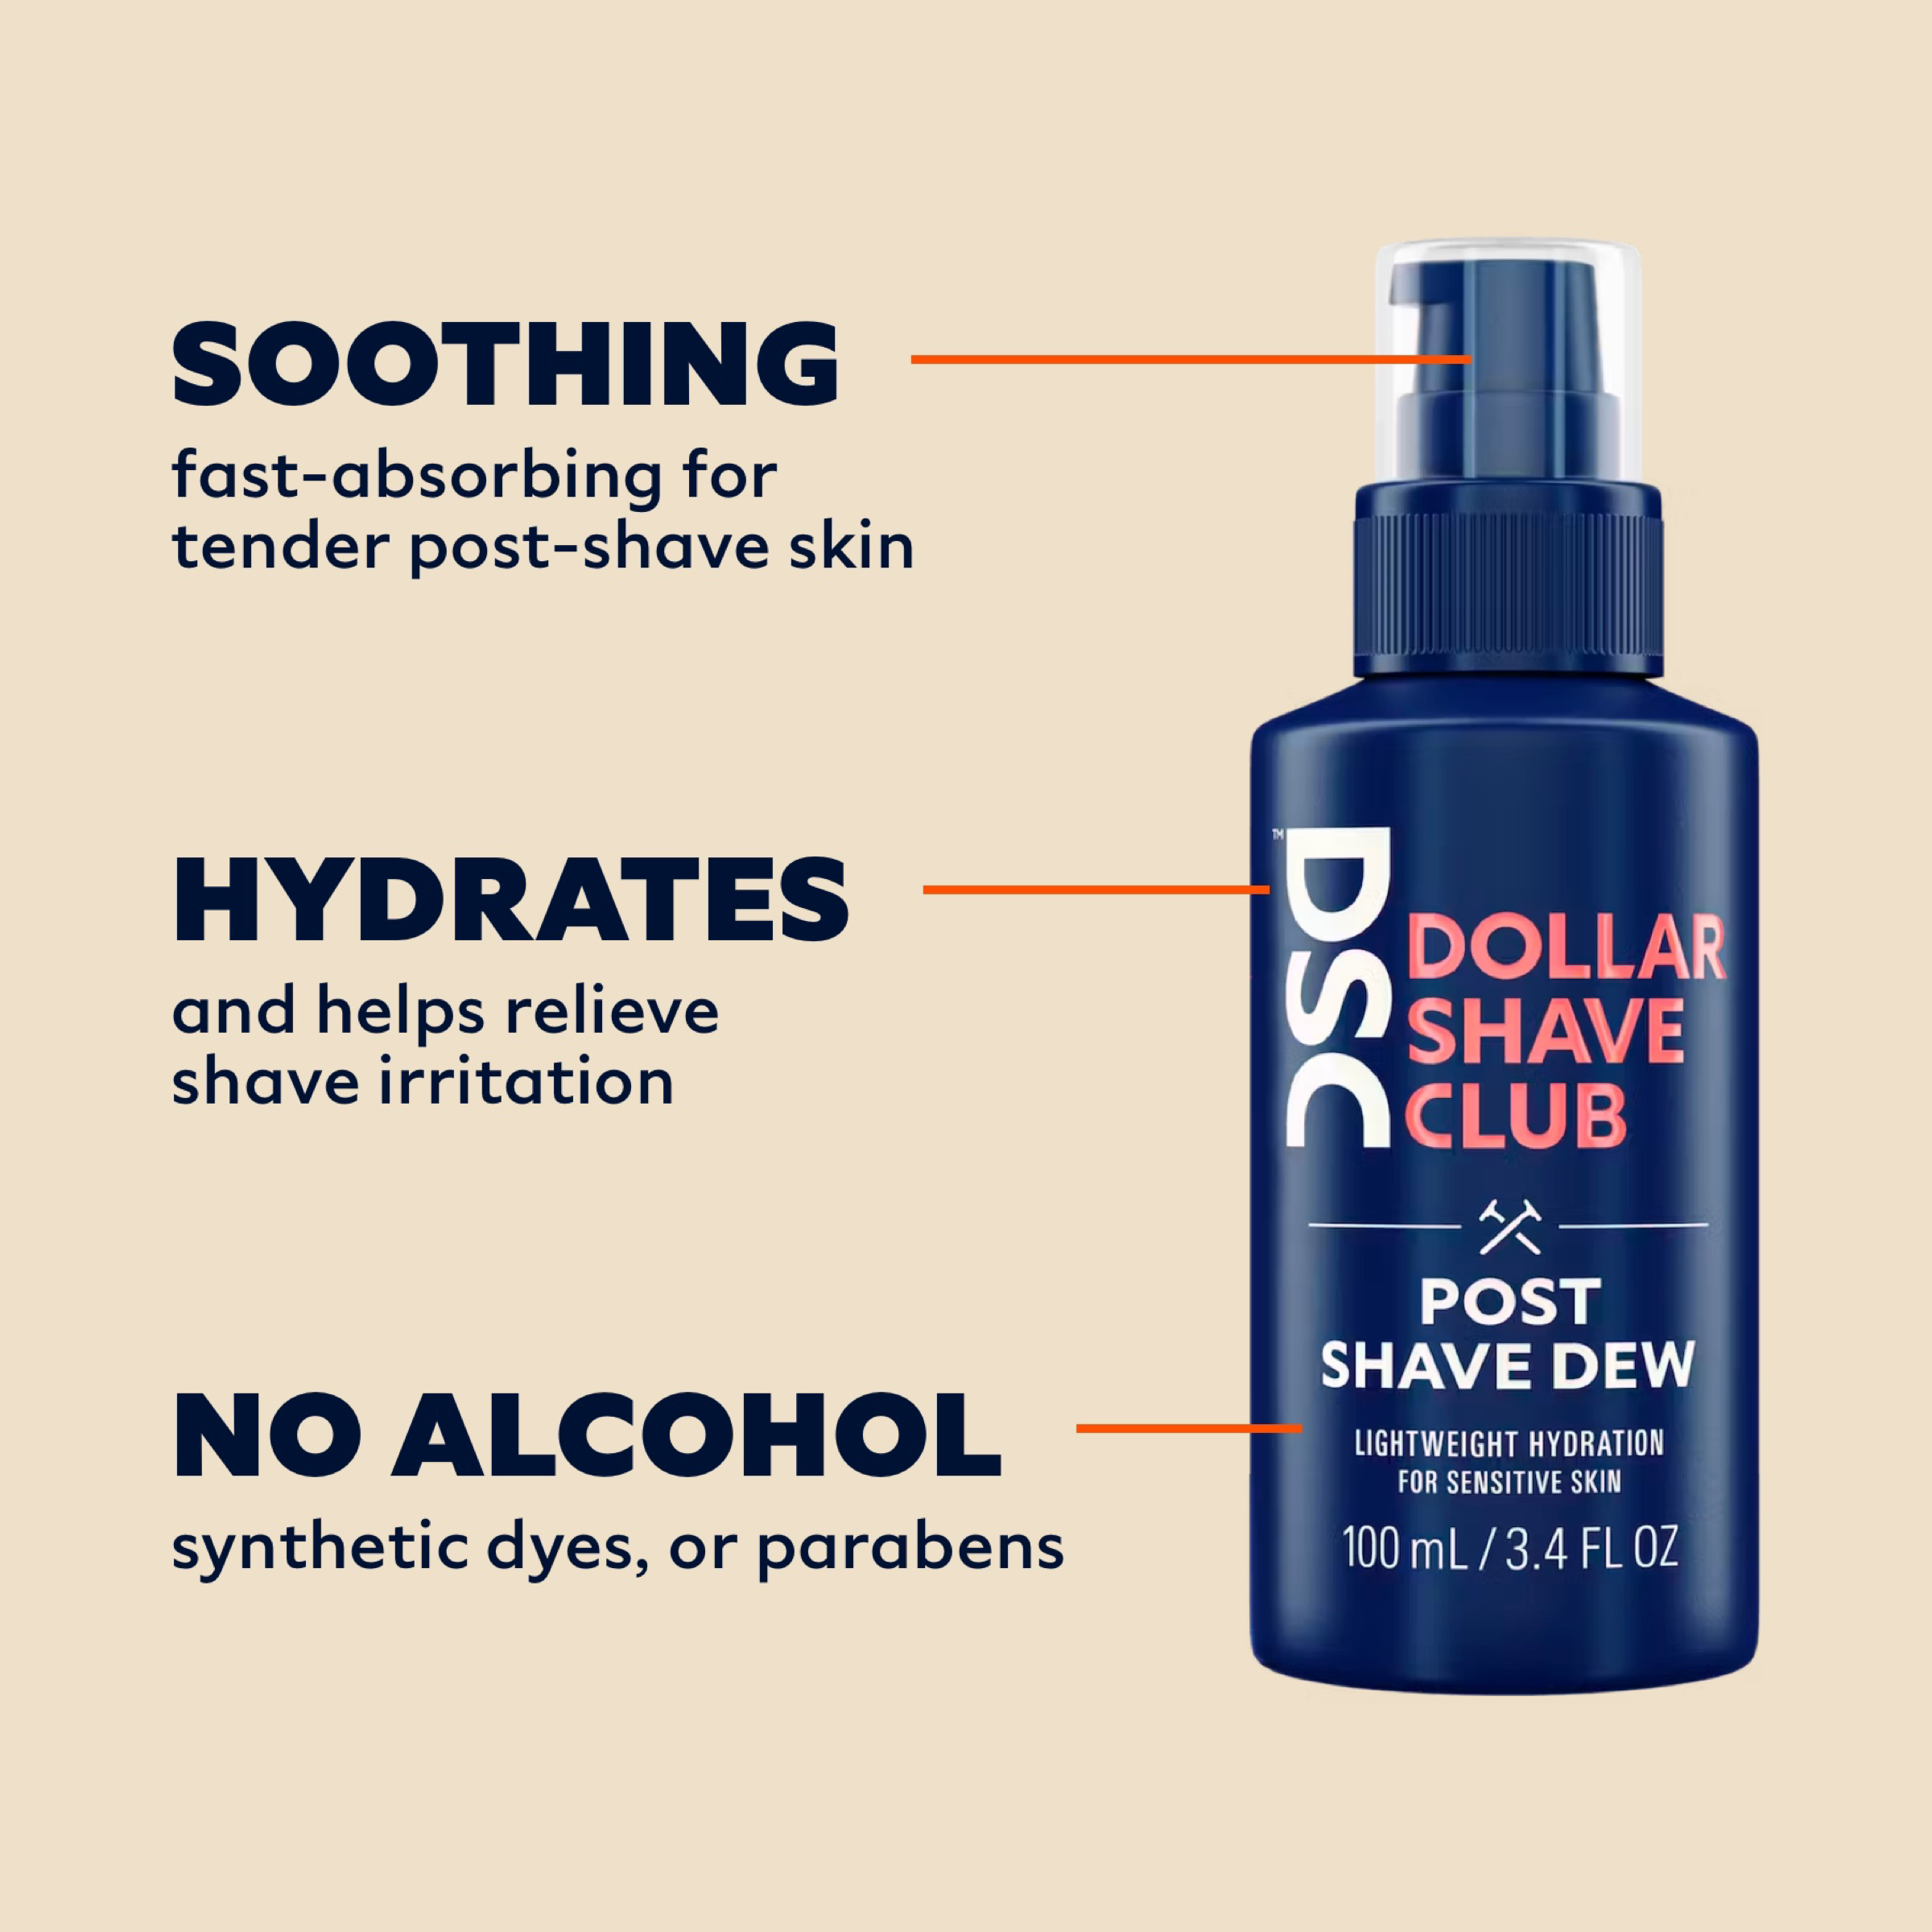 Dollar Shave Club Post Shave Dew soothes and hydrates with no alcohols.